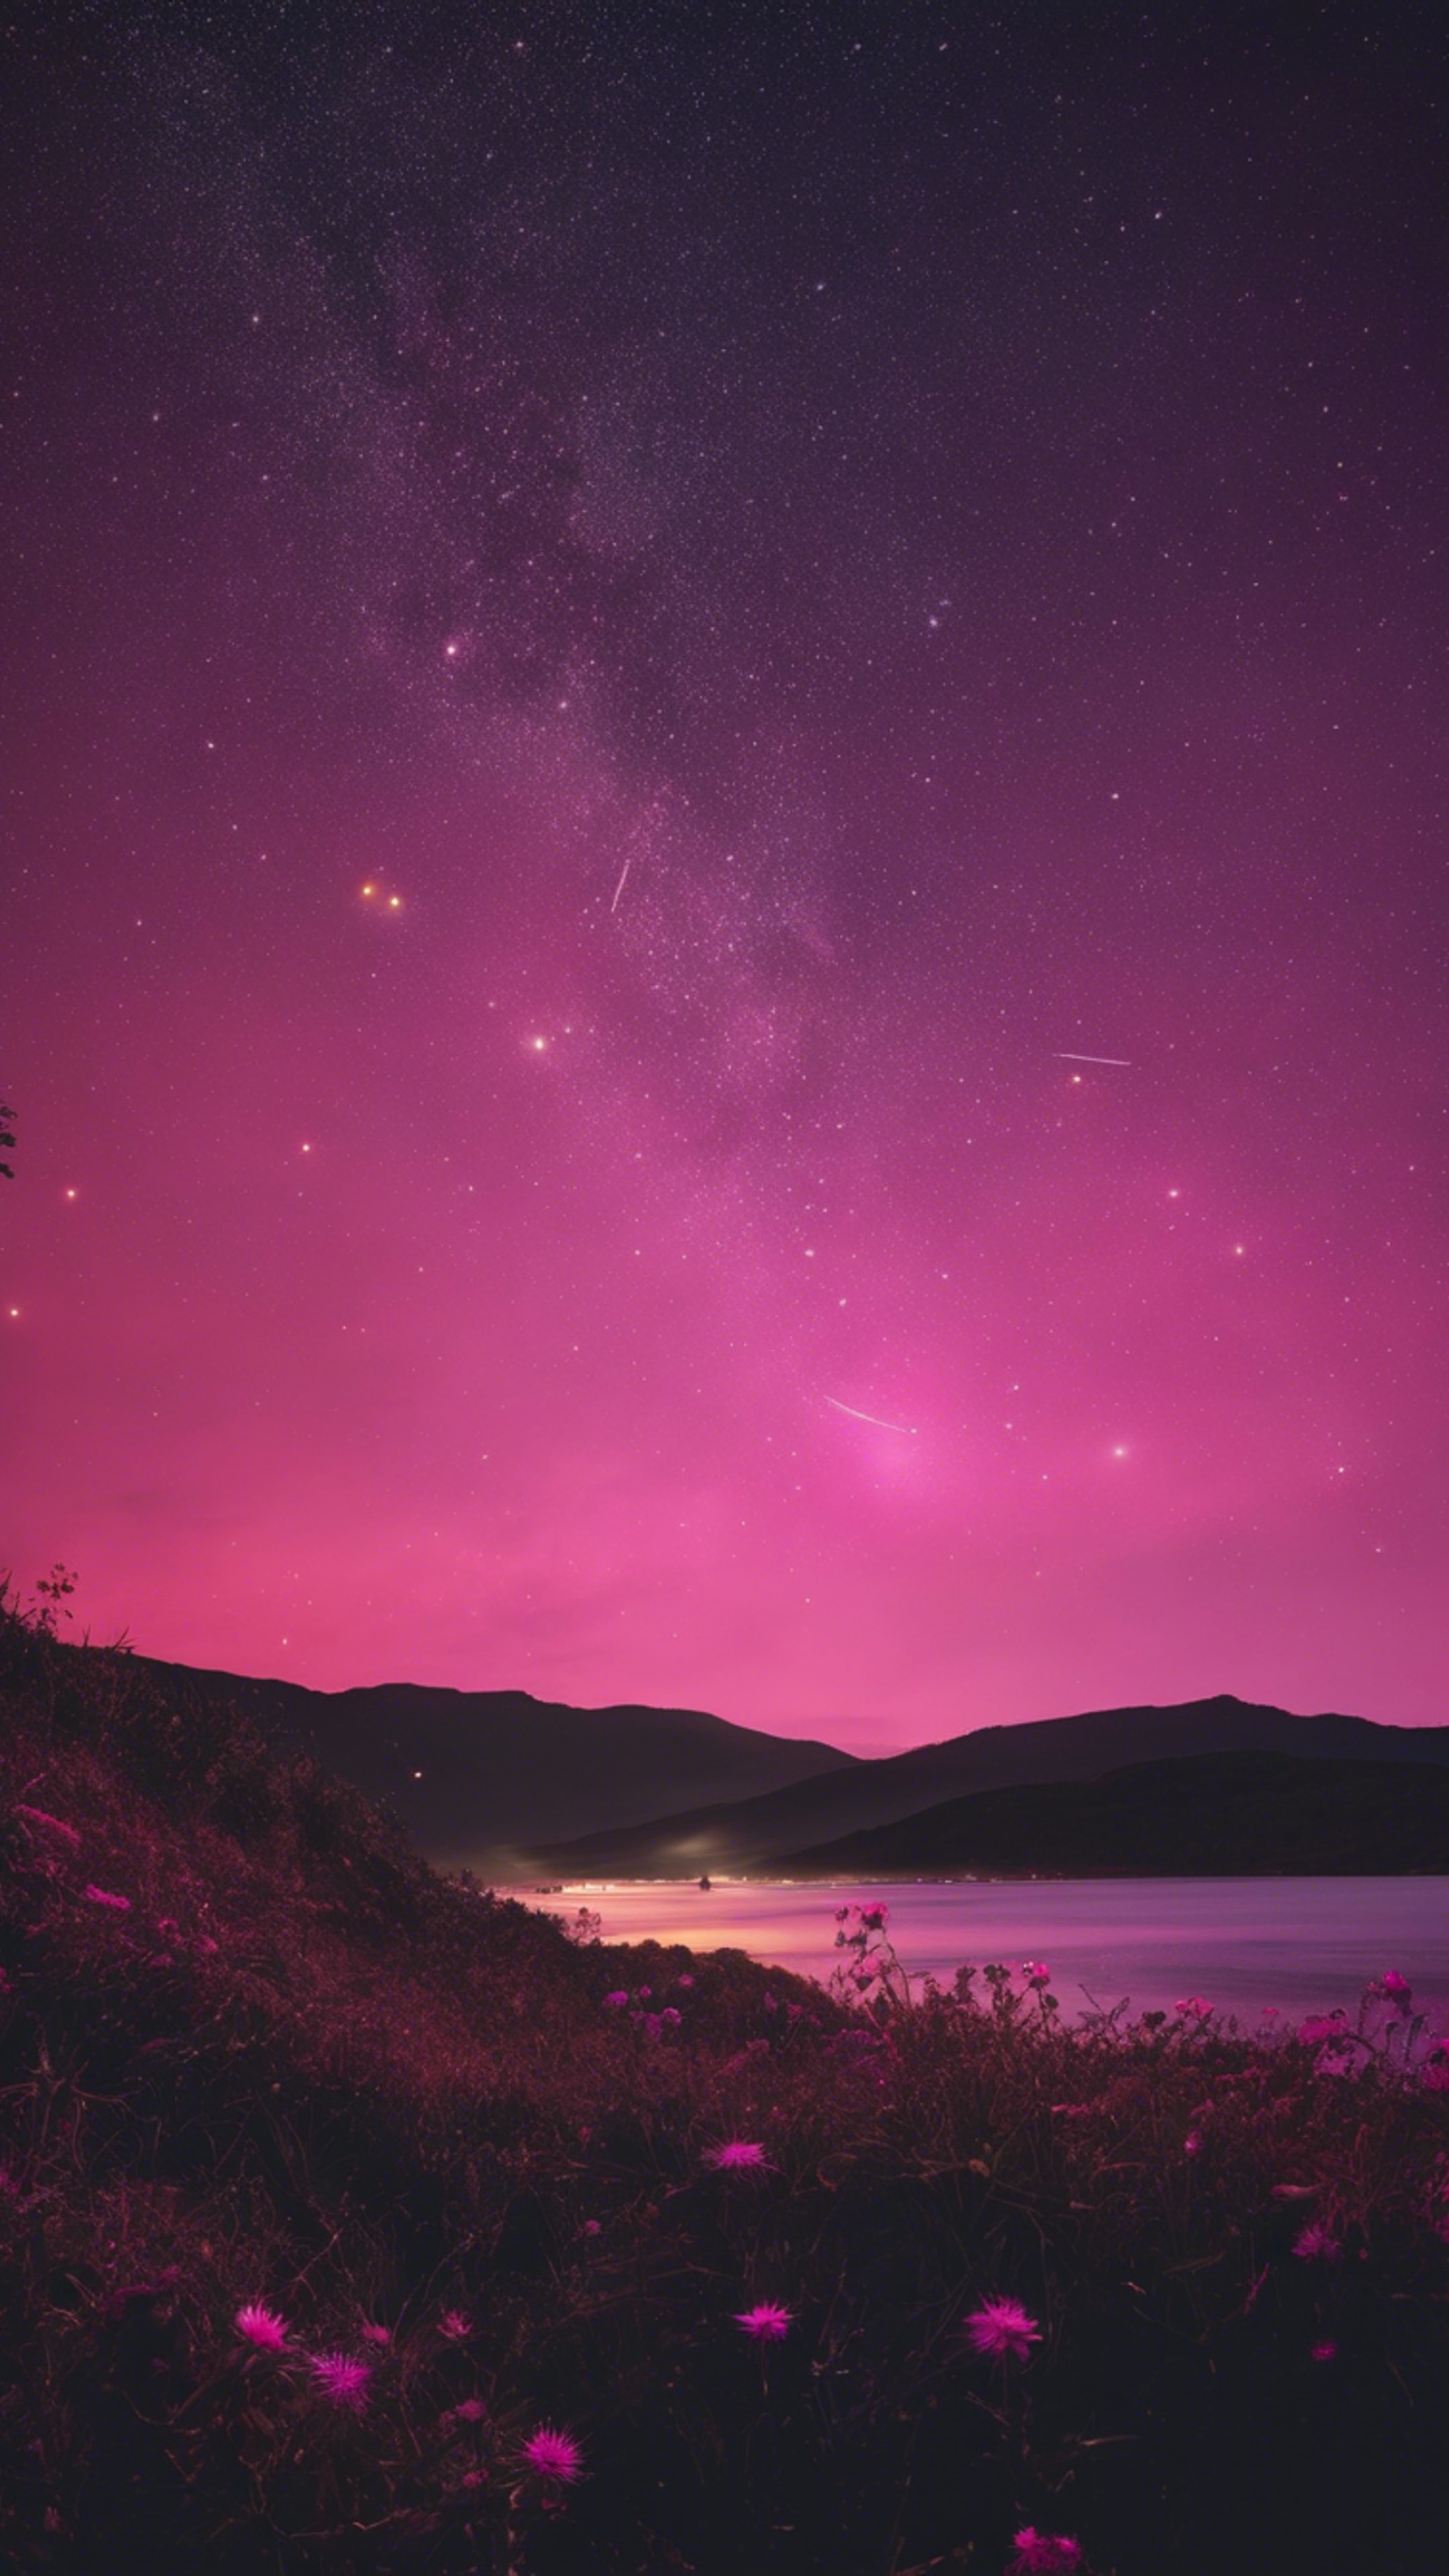 A shooting star glowing in a vibrant pink as it crosses the dark night sky. Обои[c8fce7a9134e4e29a83b]